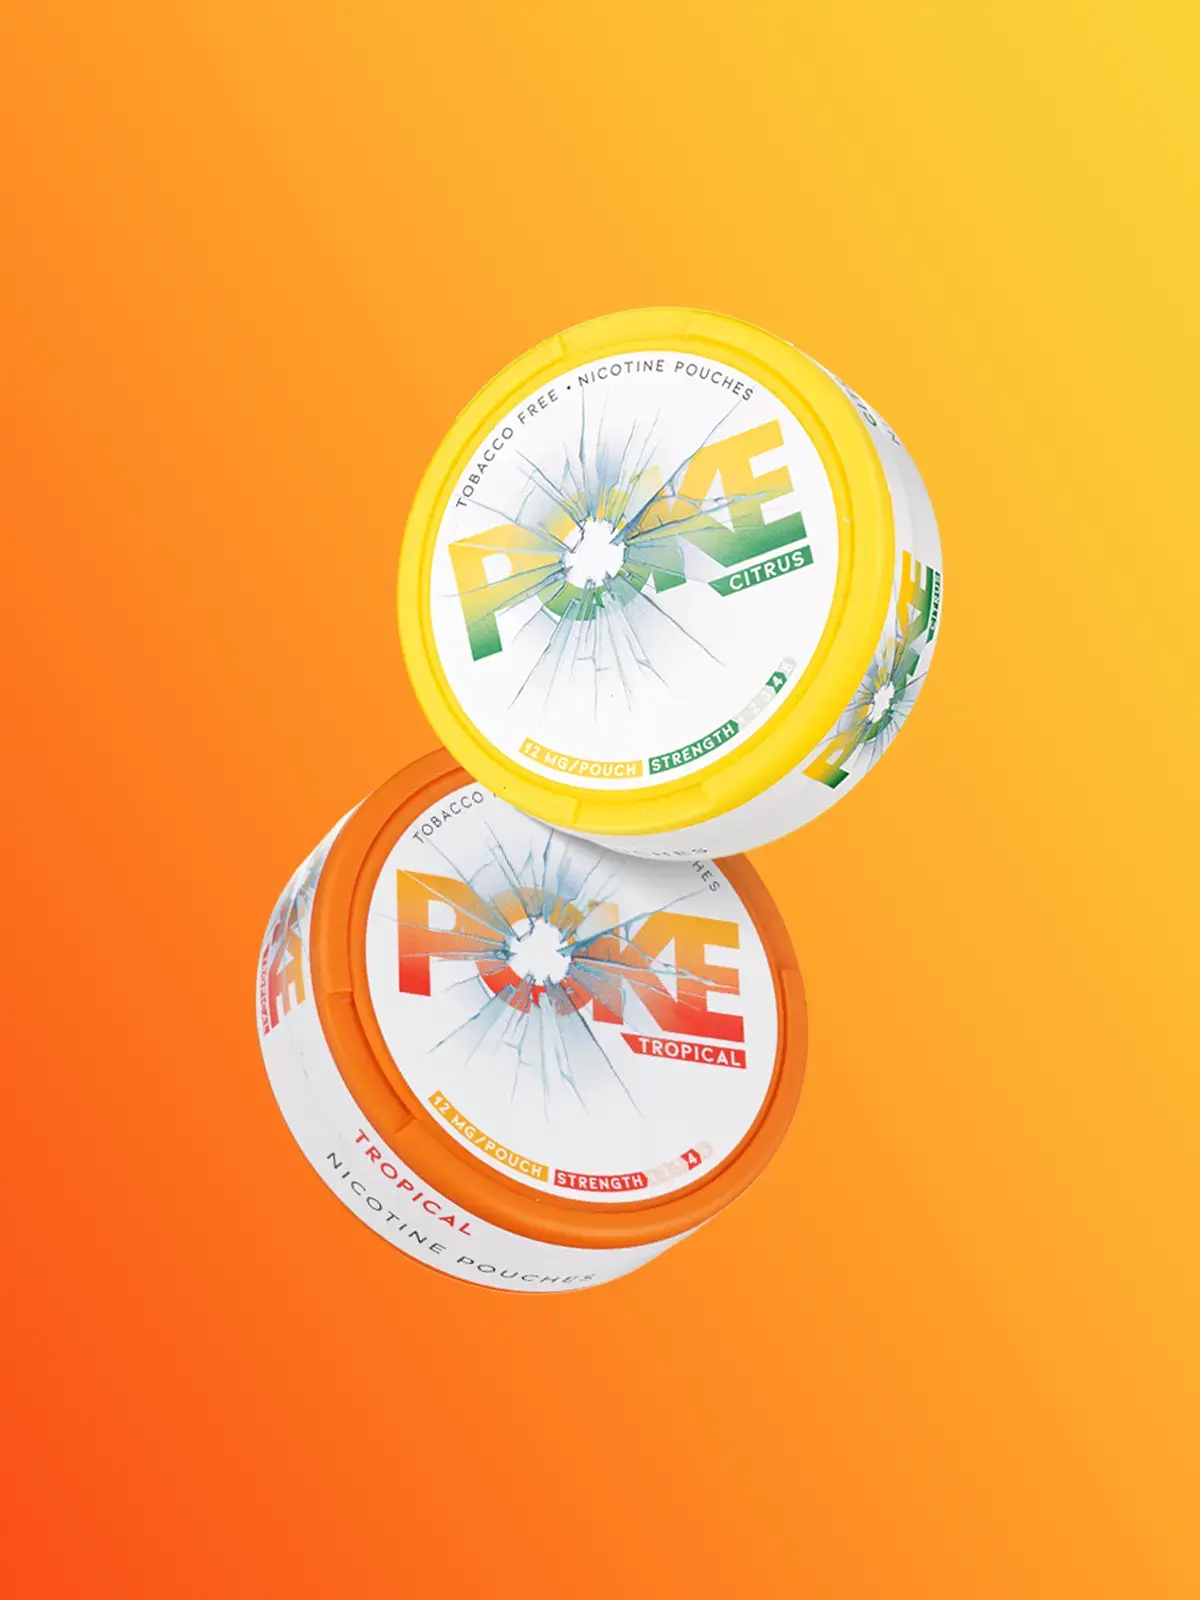 Two containers of Poke nicotine pouches; Citrus and Tropical flavours, floating in front of a warm yellow and orange background